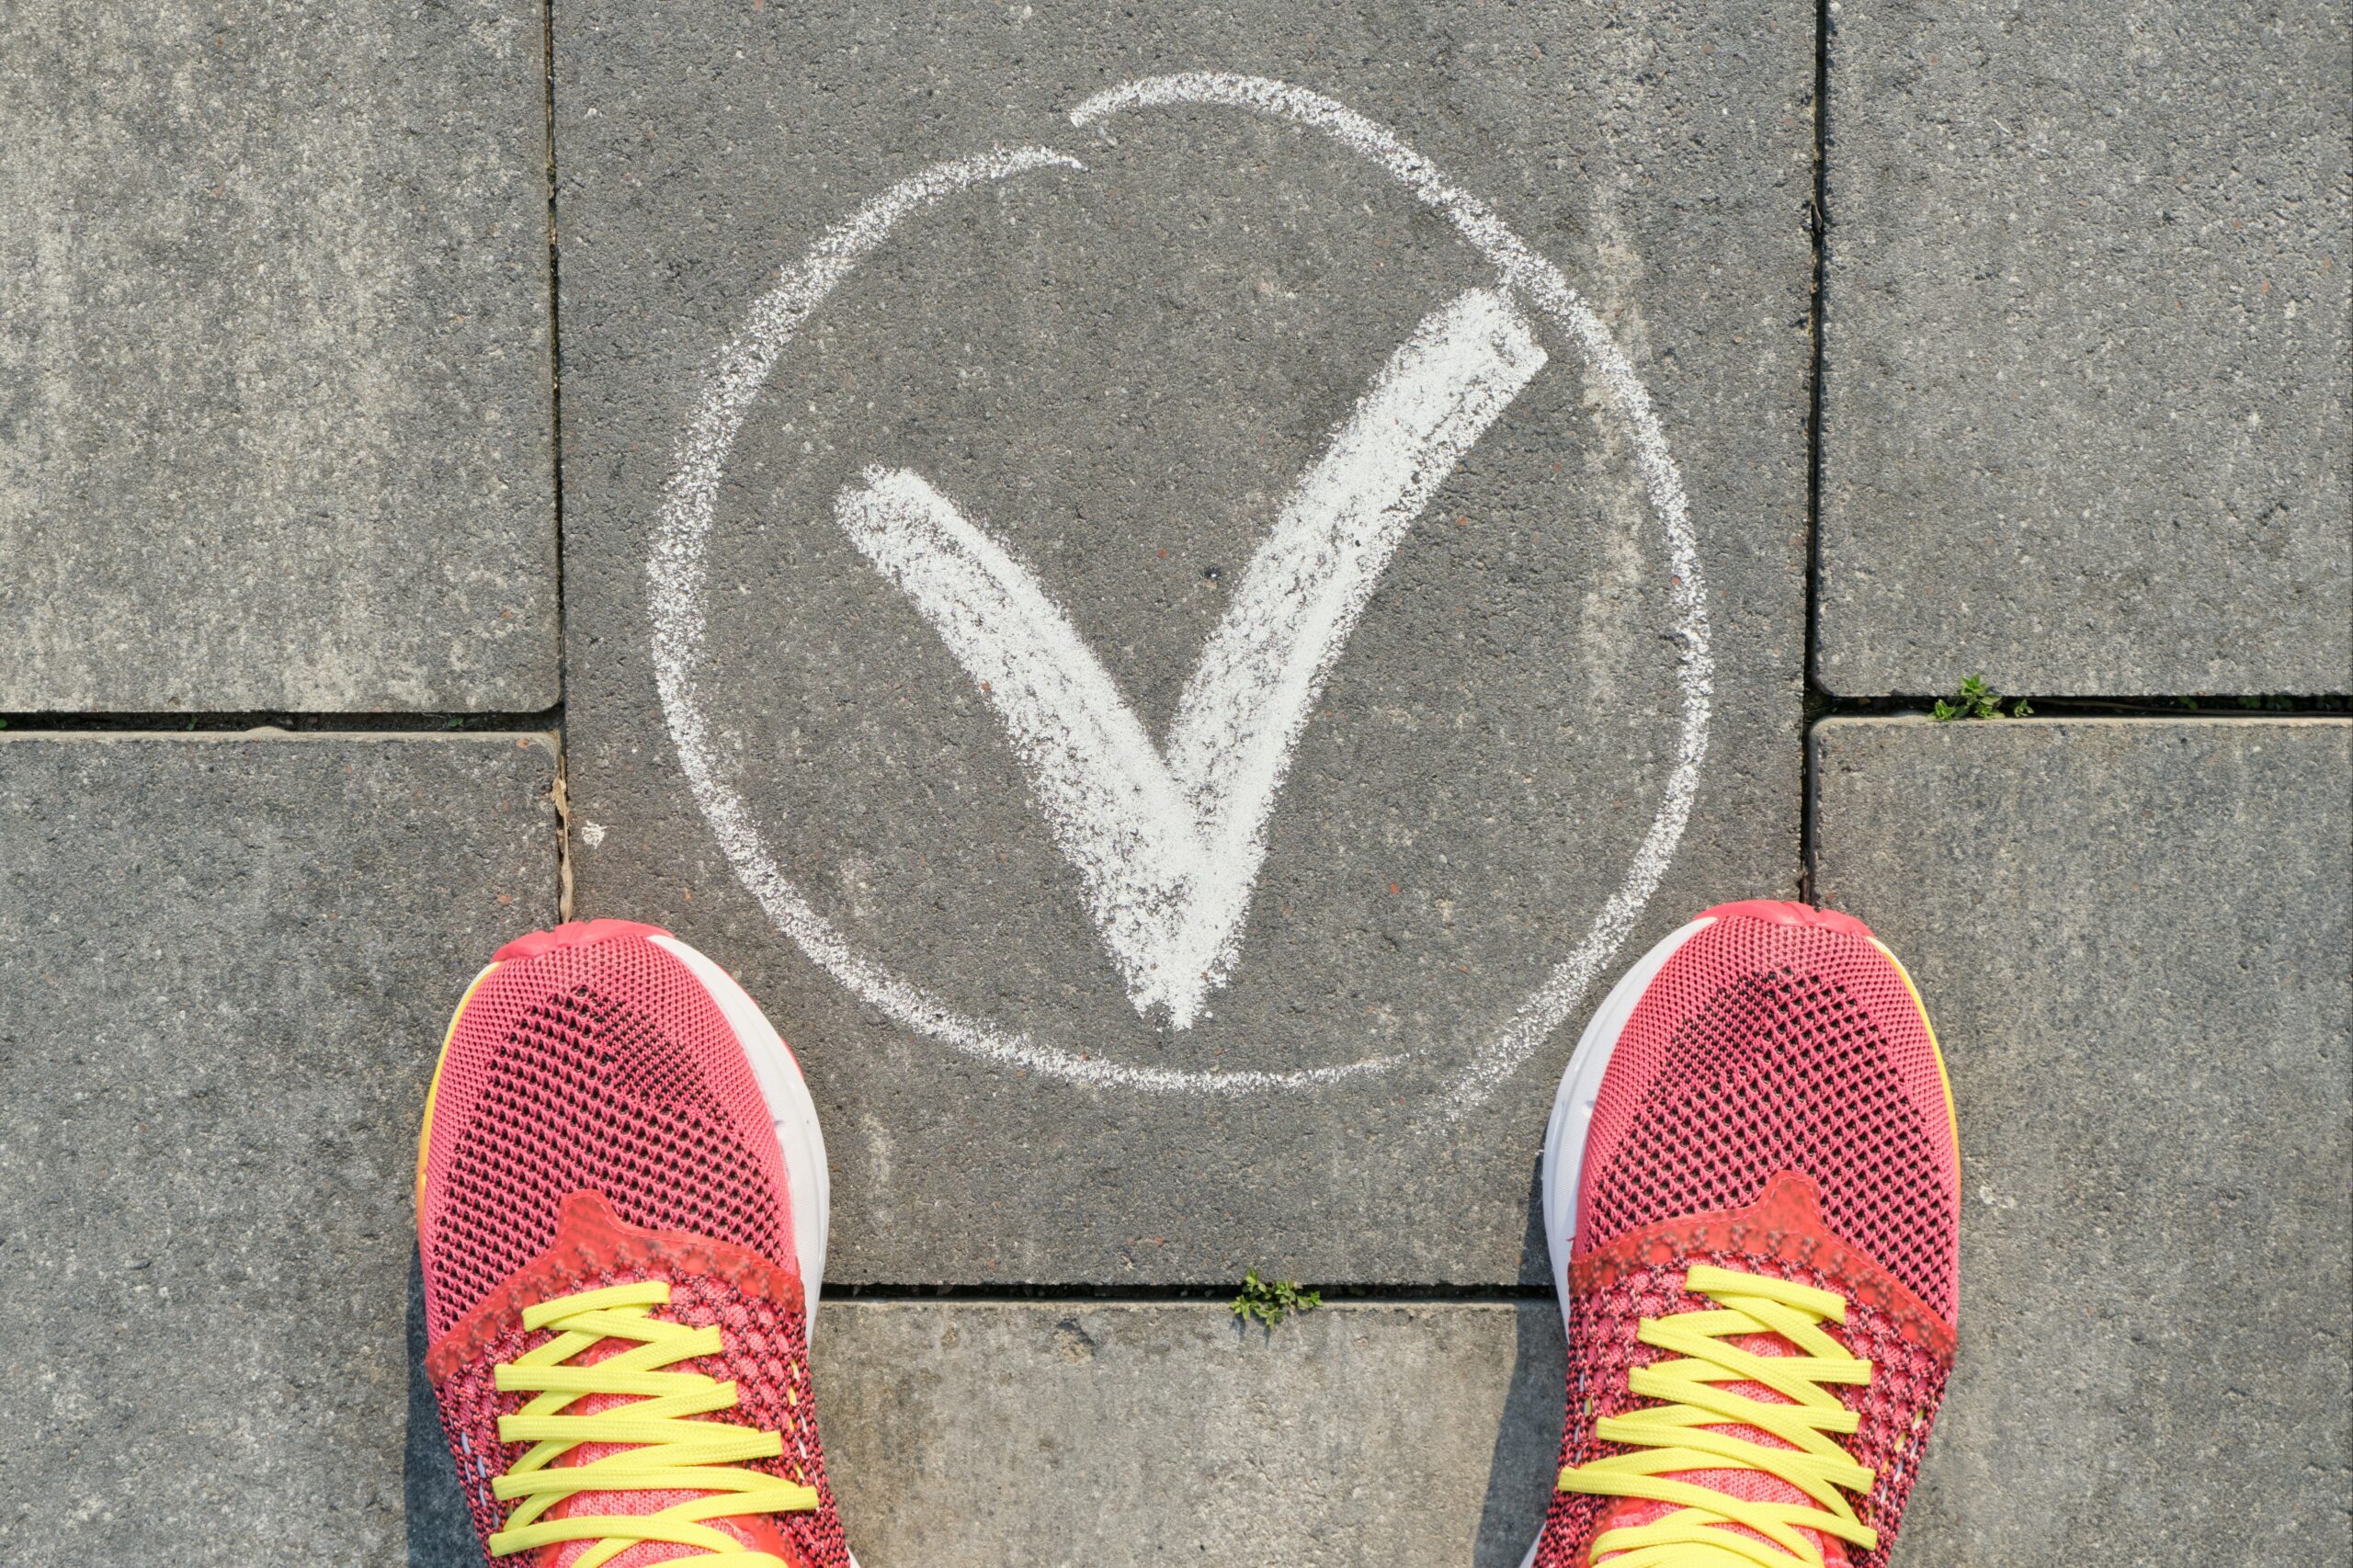 Checkmark ok sign on gray sidewalk with woman legs in sneakers, top view